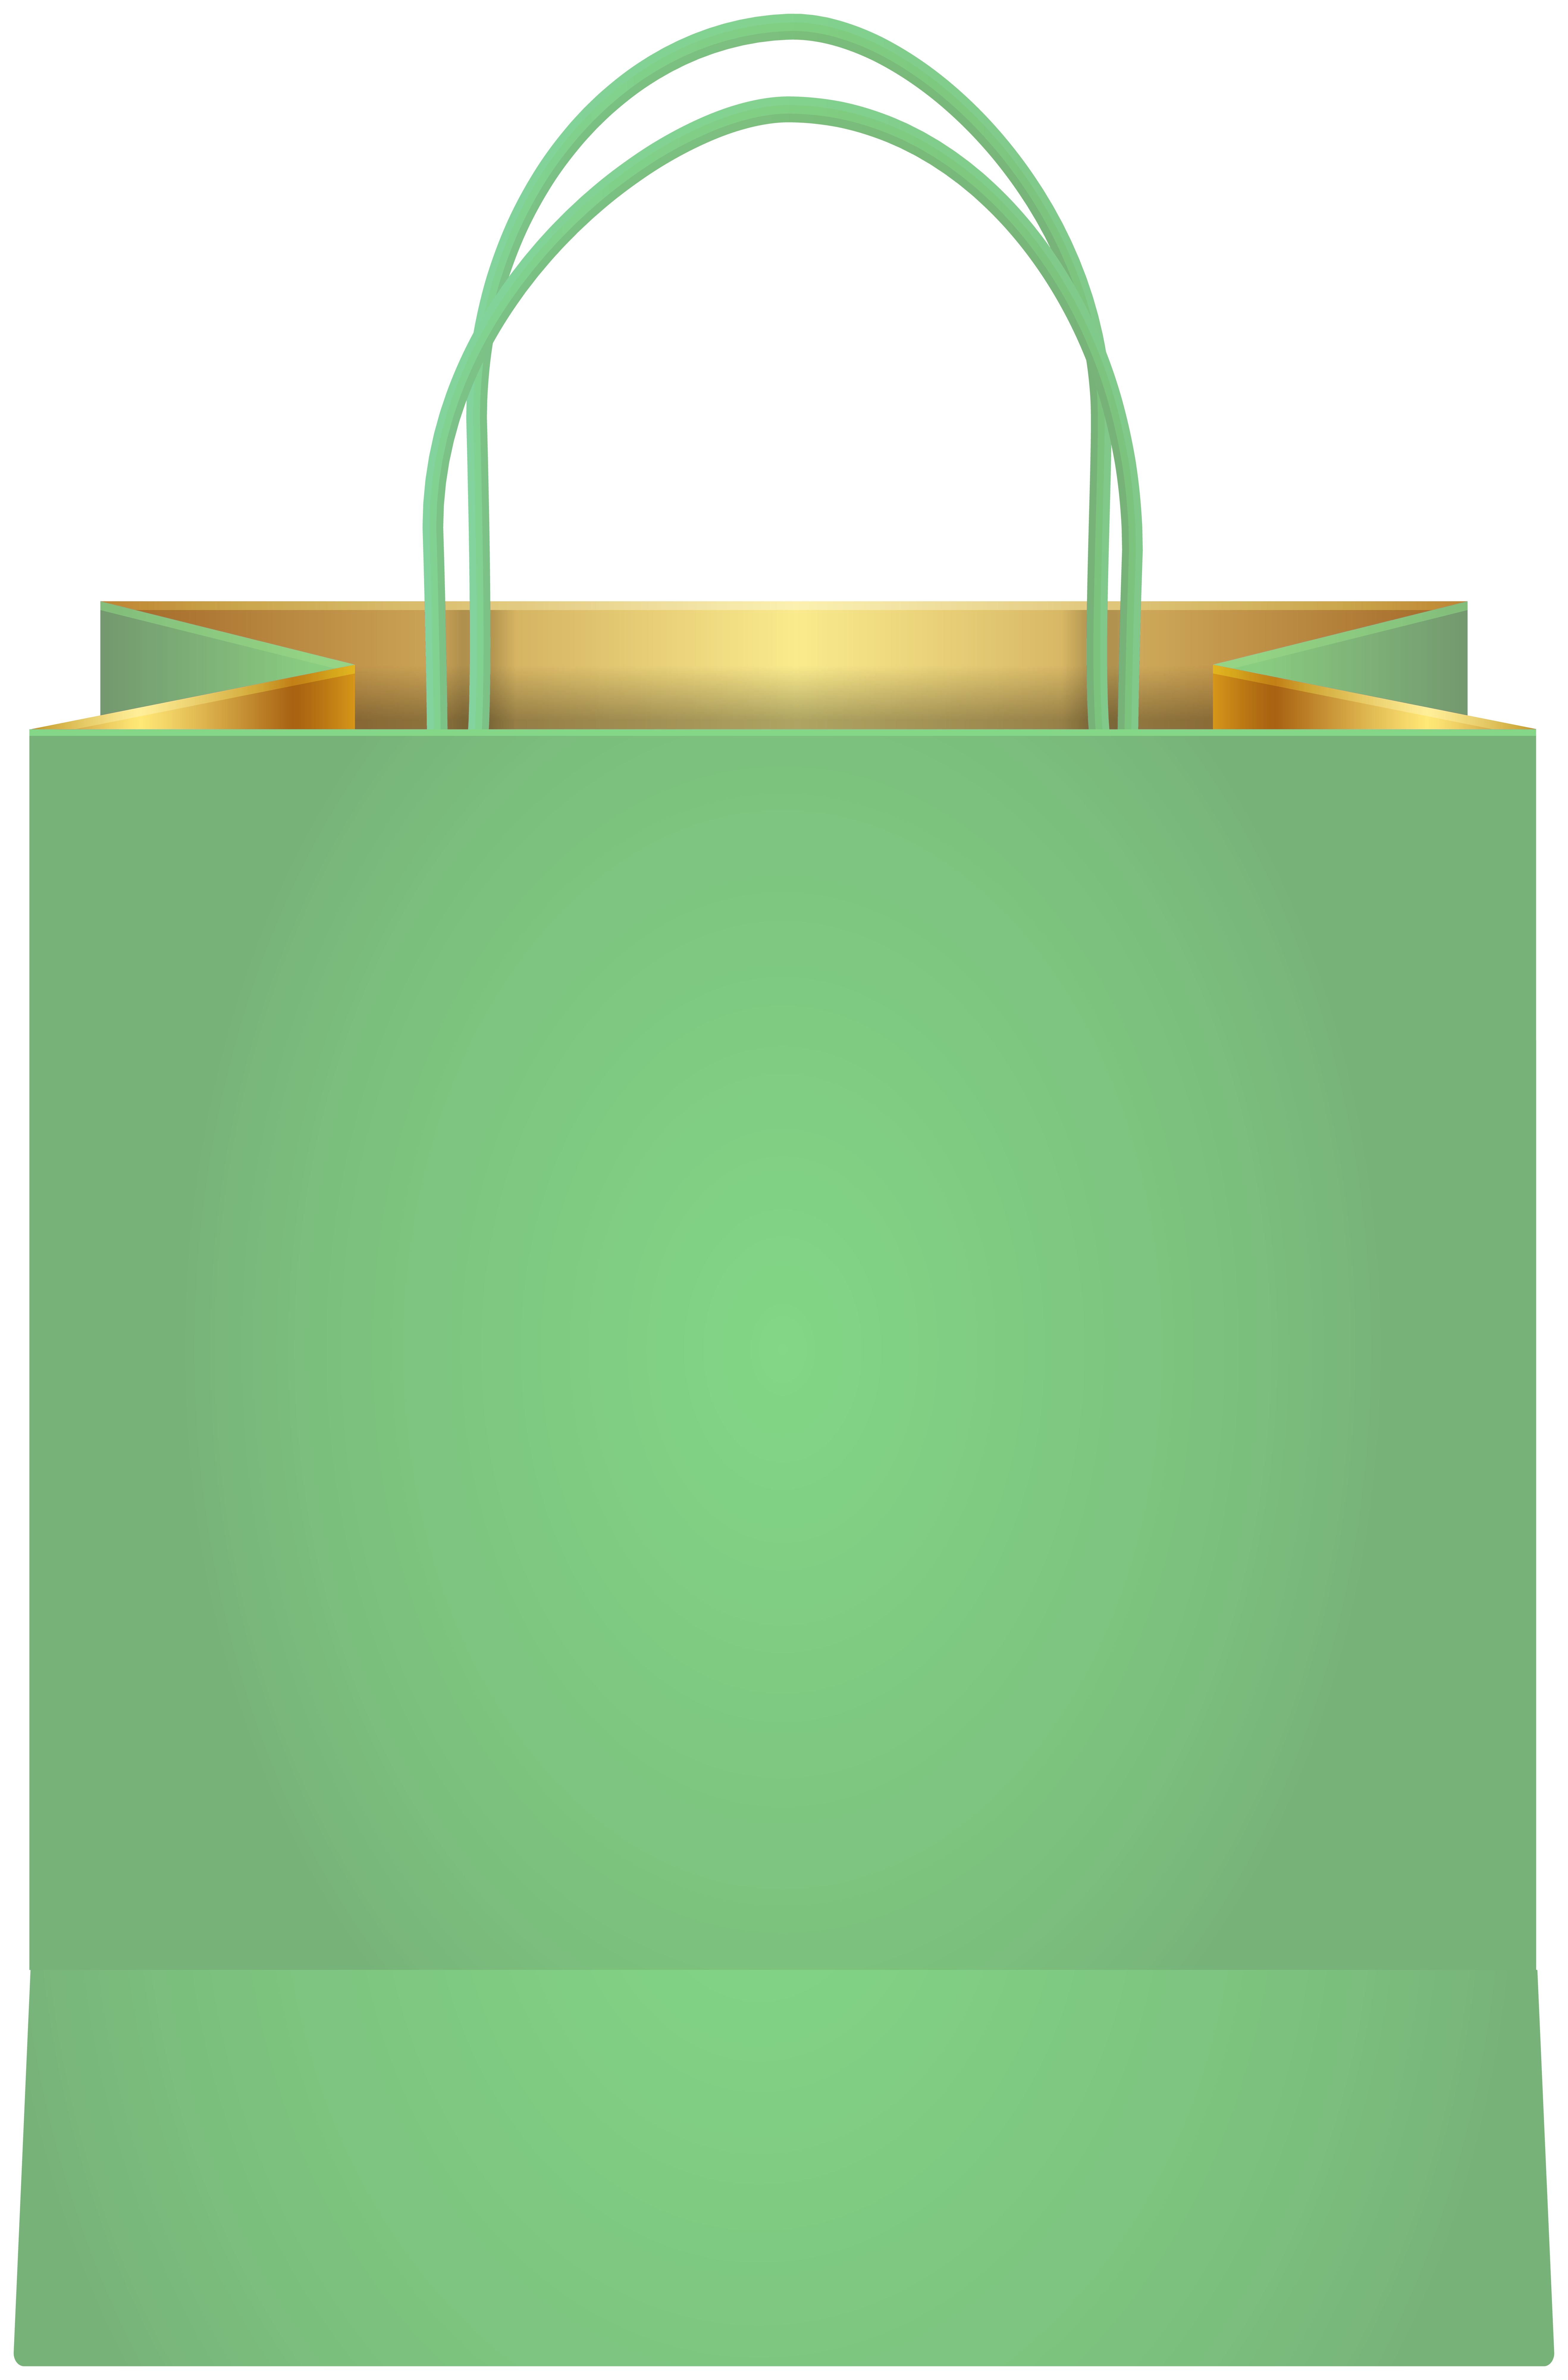 Green Shopping Bag clipart. Free download transparent .PNG